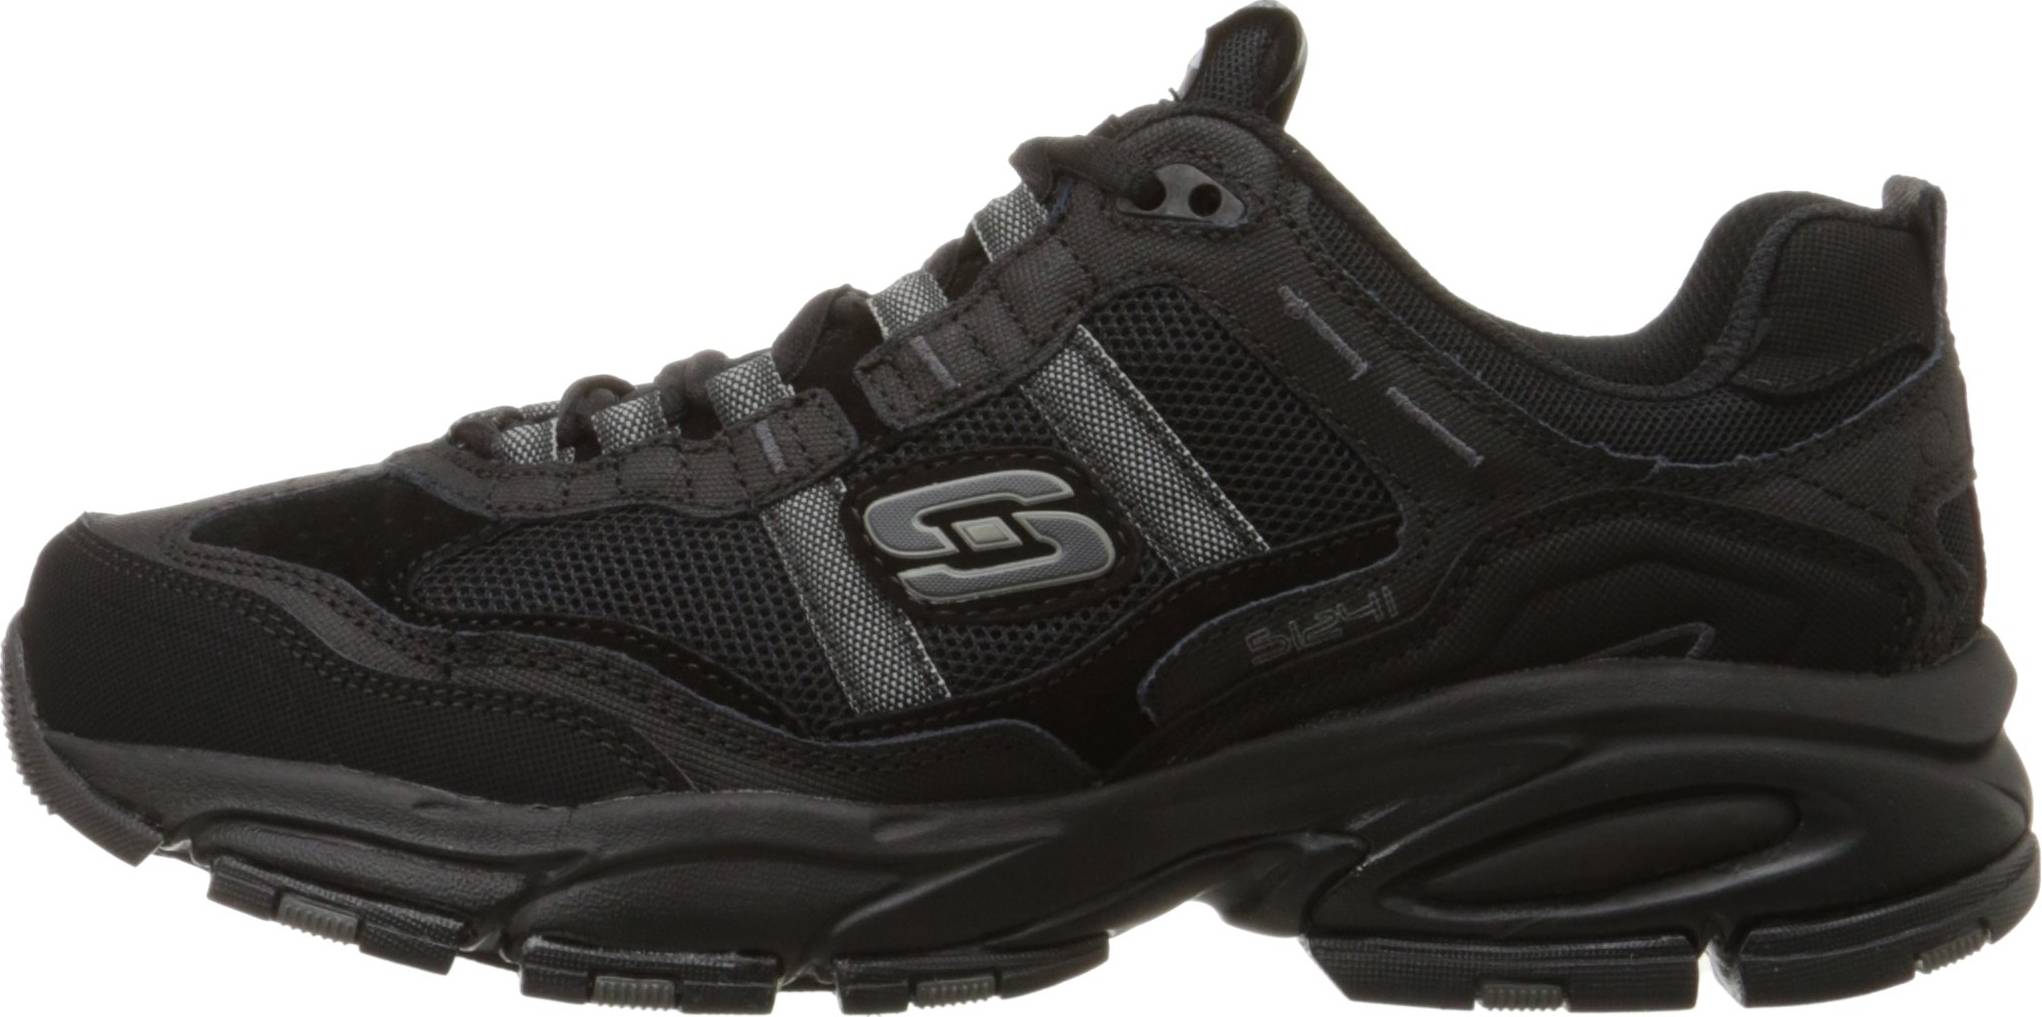 Save 37% on Skechers Training Shoes (27 